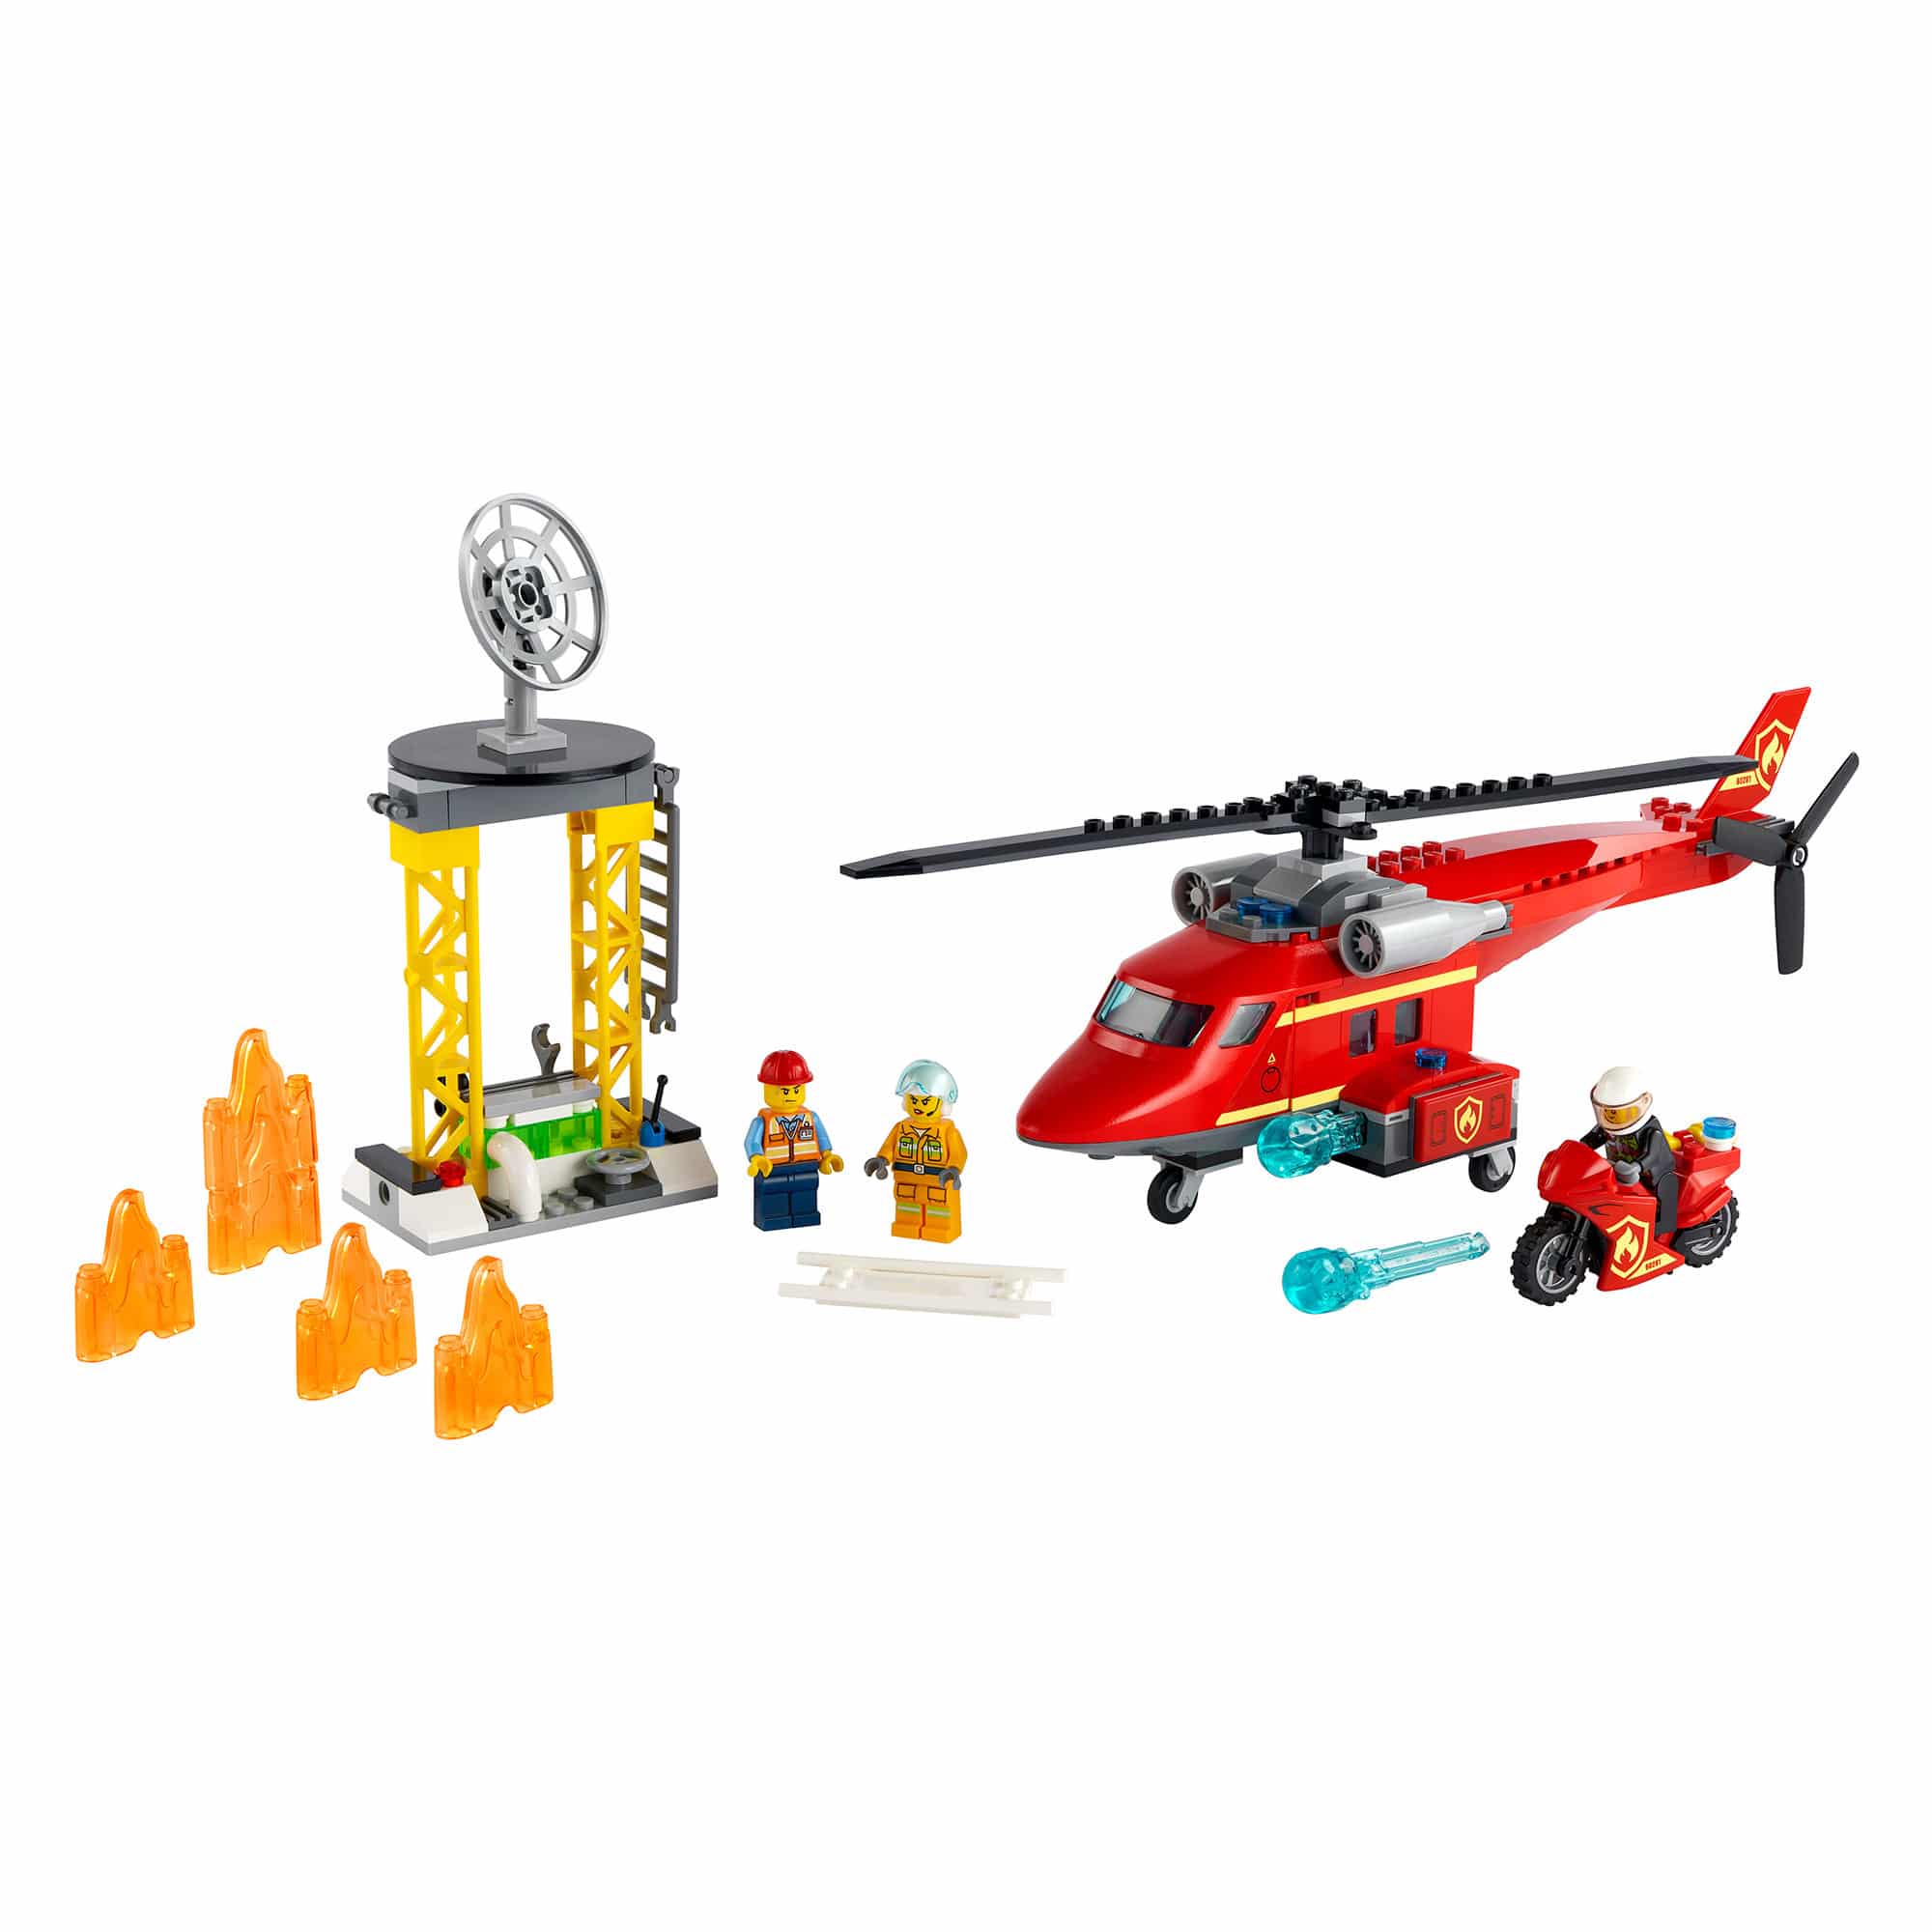 LEGO City - 60281 Fire Rescue Helicopter